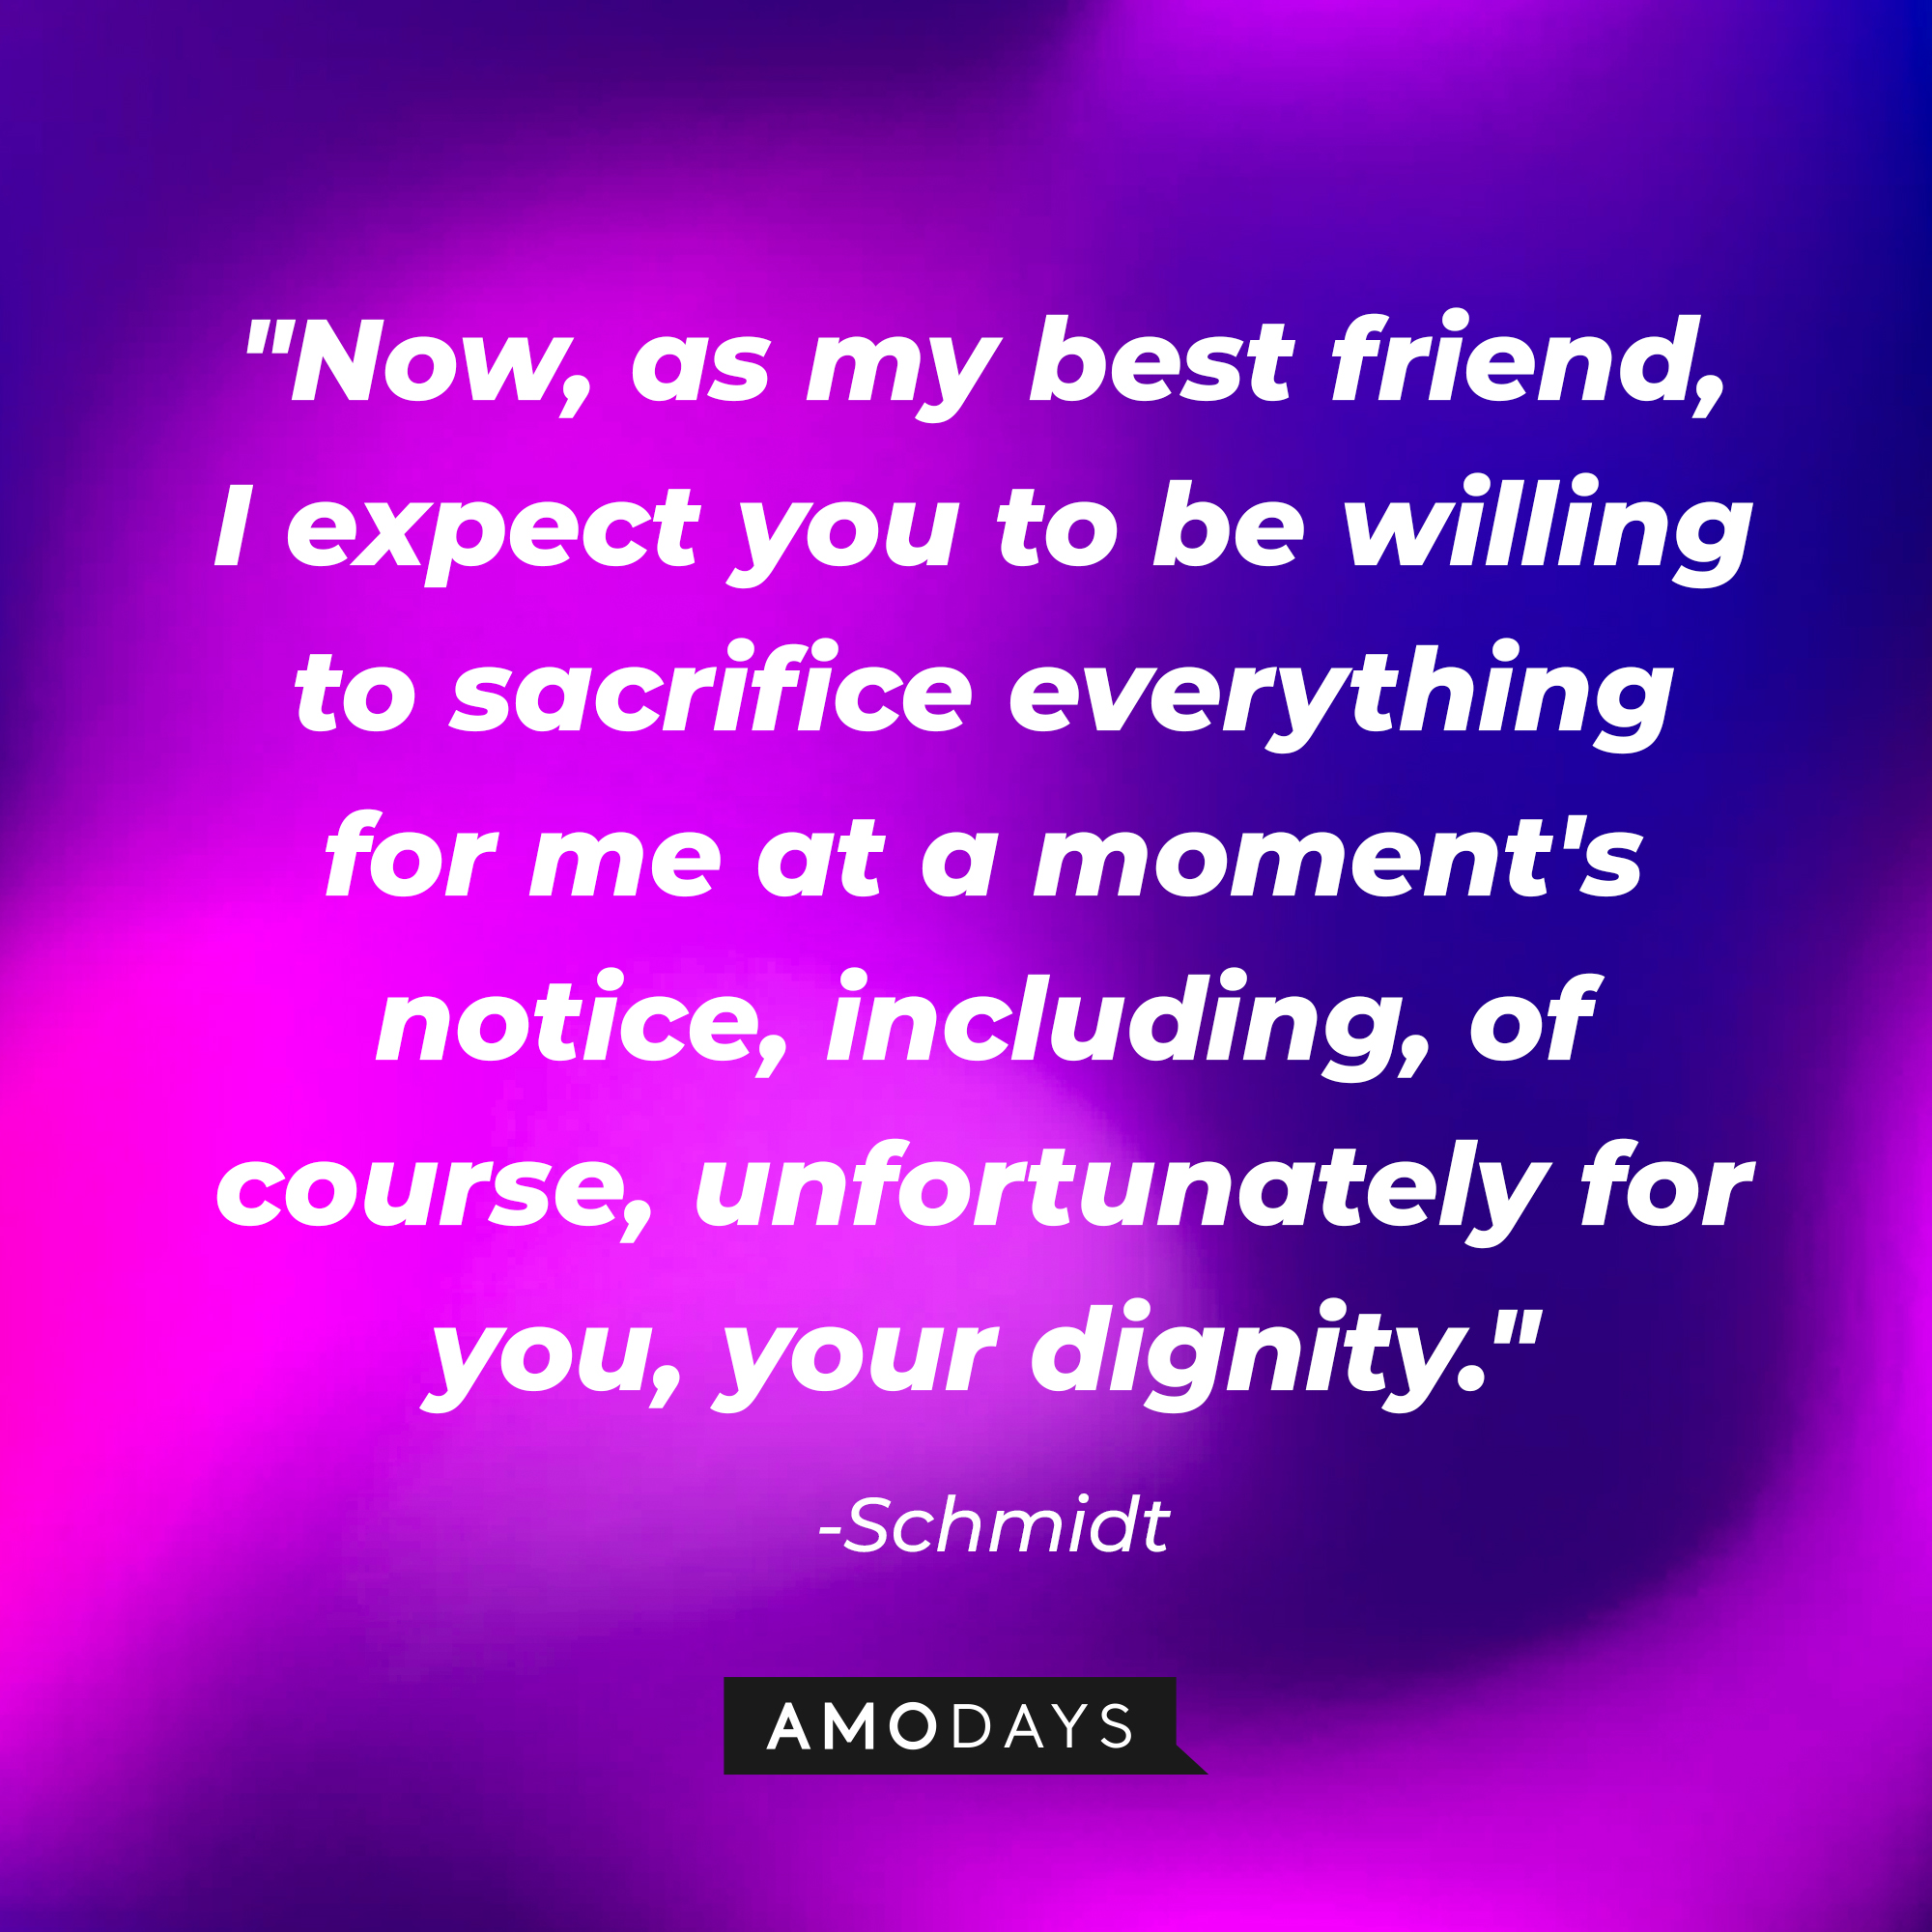 Schmidt's quote, "Now, as my best friend, I expect you to be willing to sacrifice everything for me at a moment's notice, including, of course, unfortunately for you, your dignity." | Source: Amodays